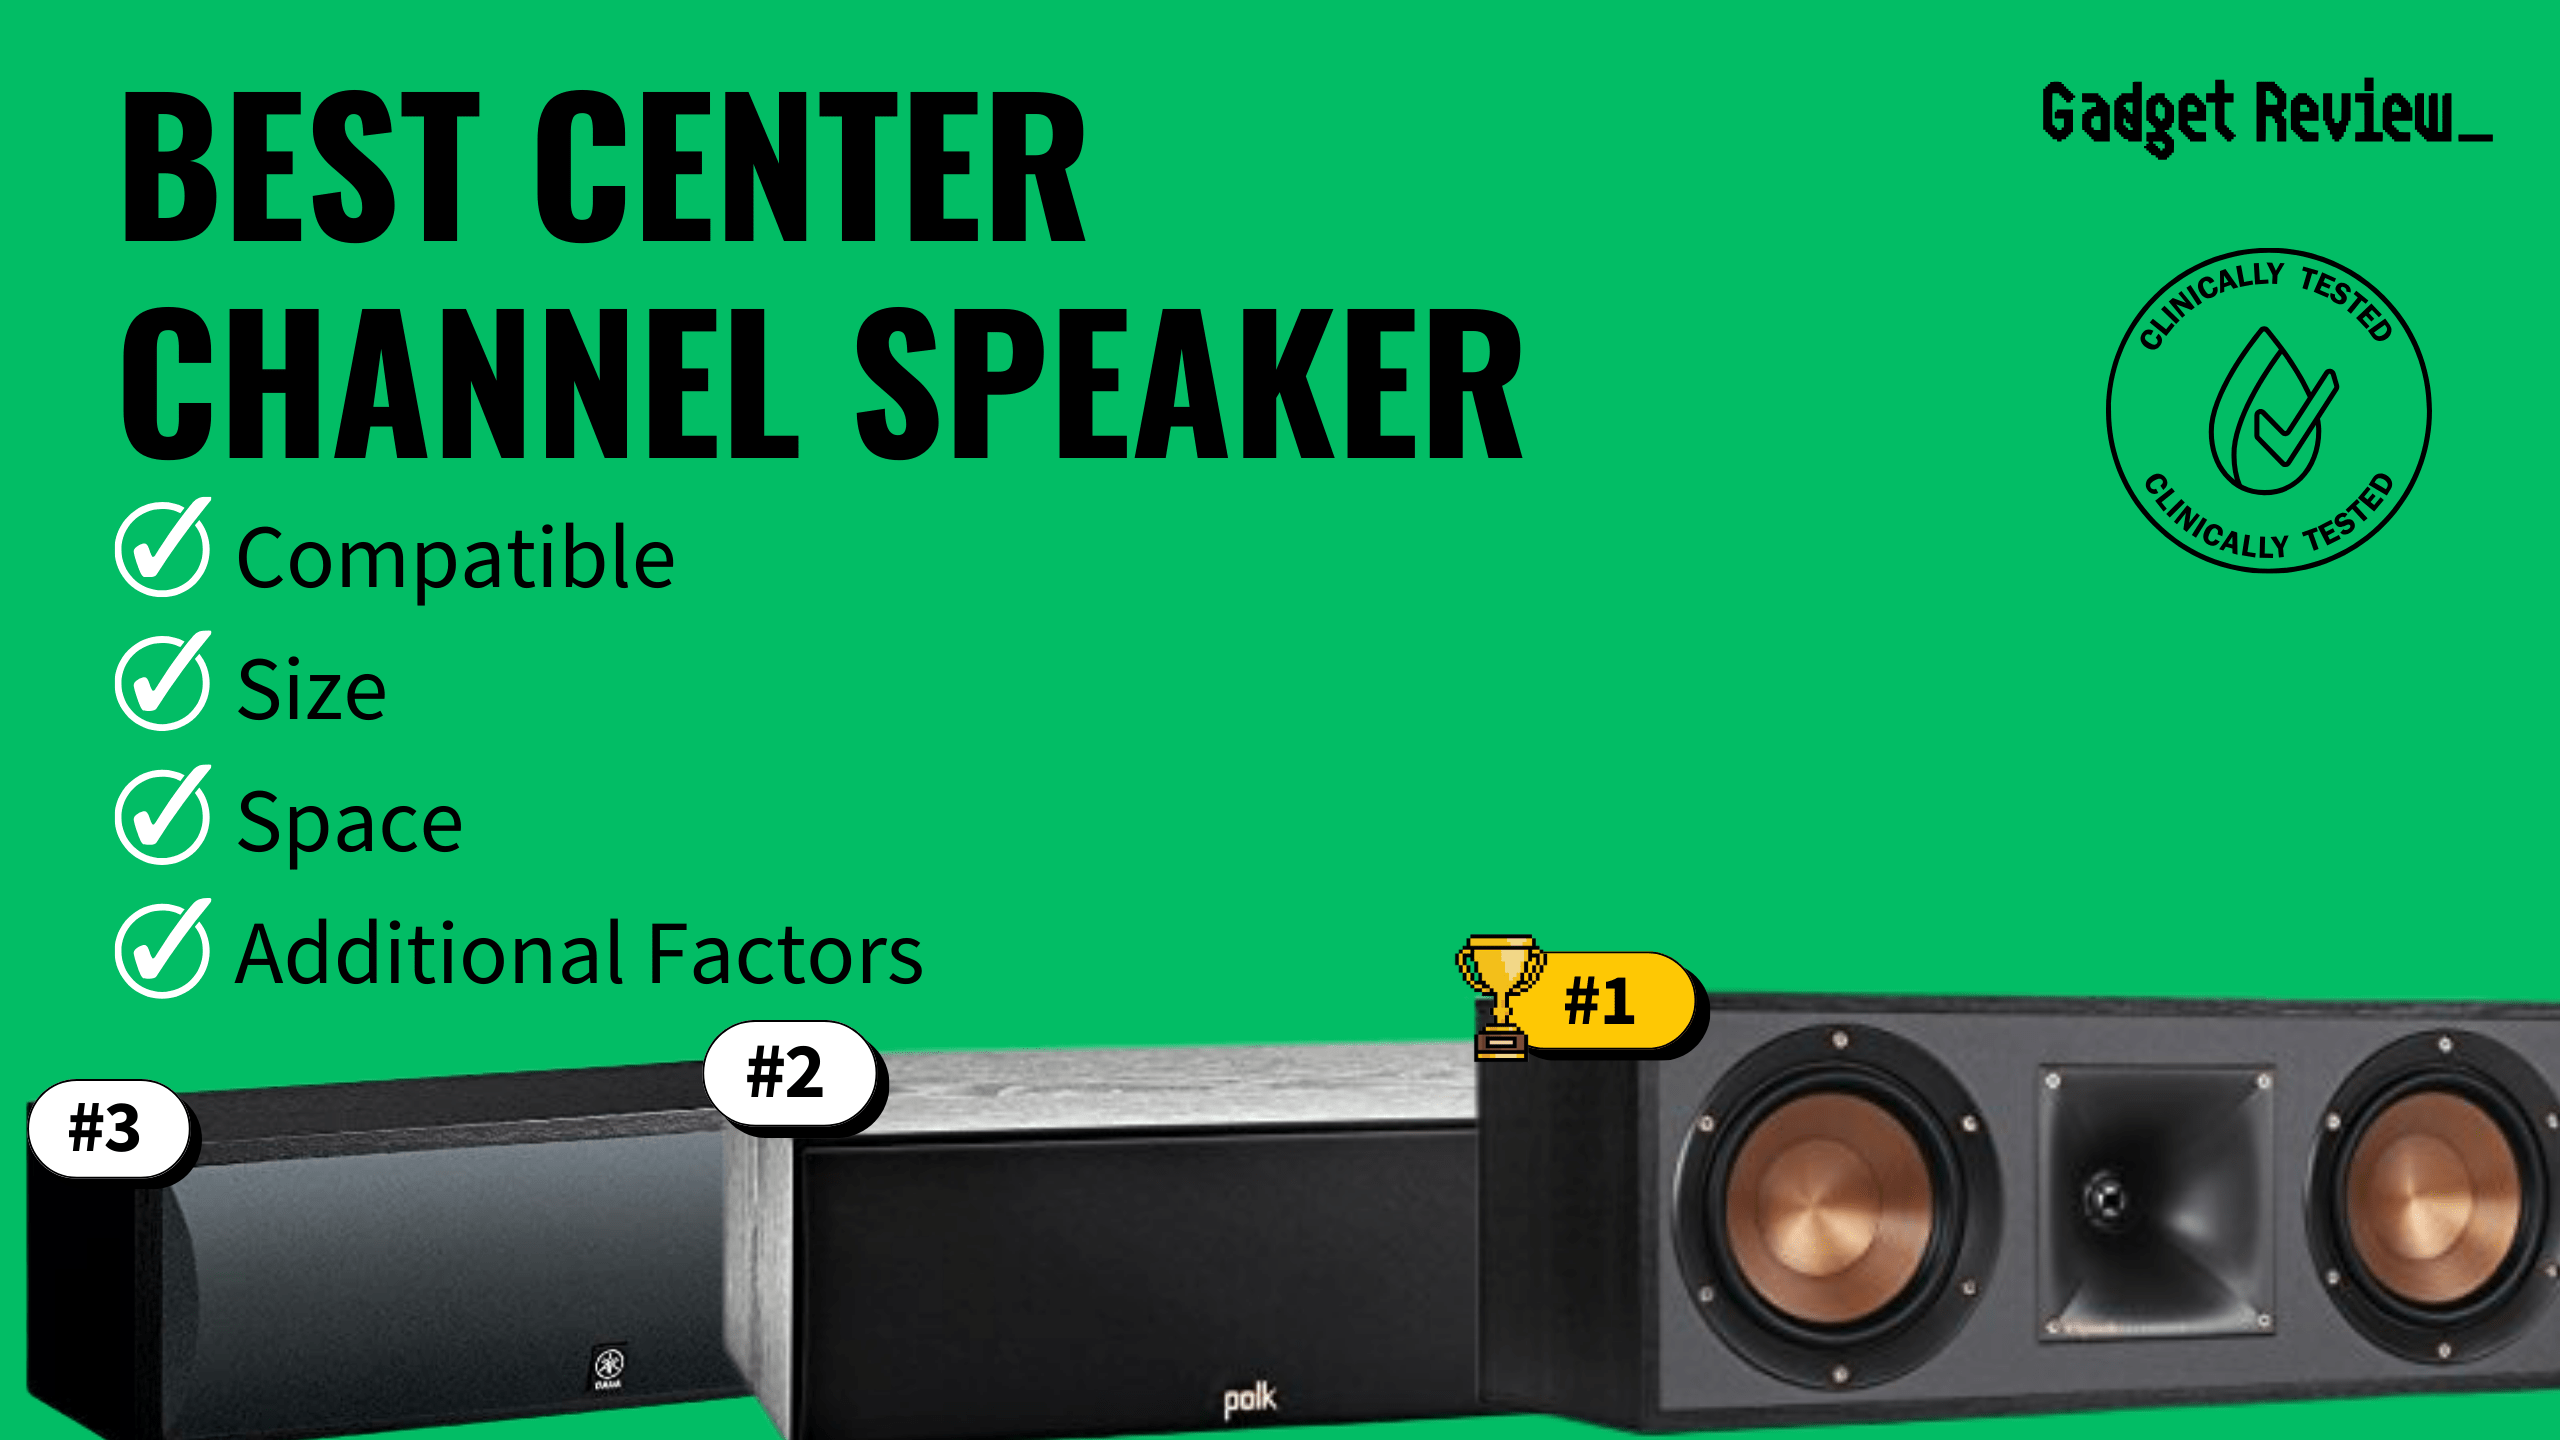 best center channel speaker featured image that shows the top three best speaker models